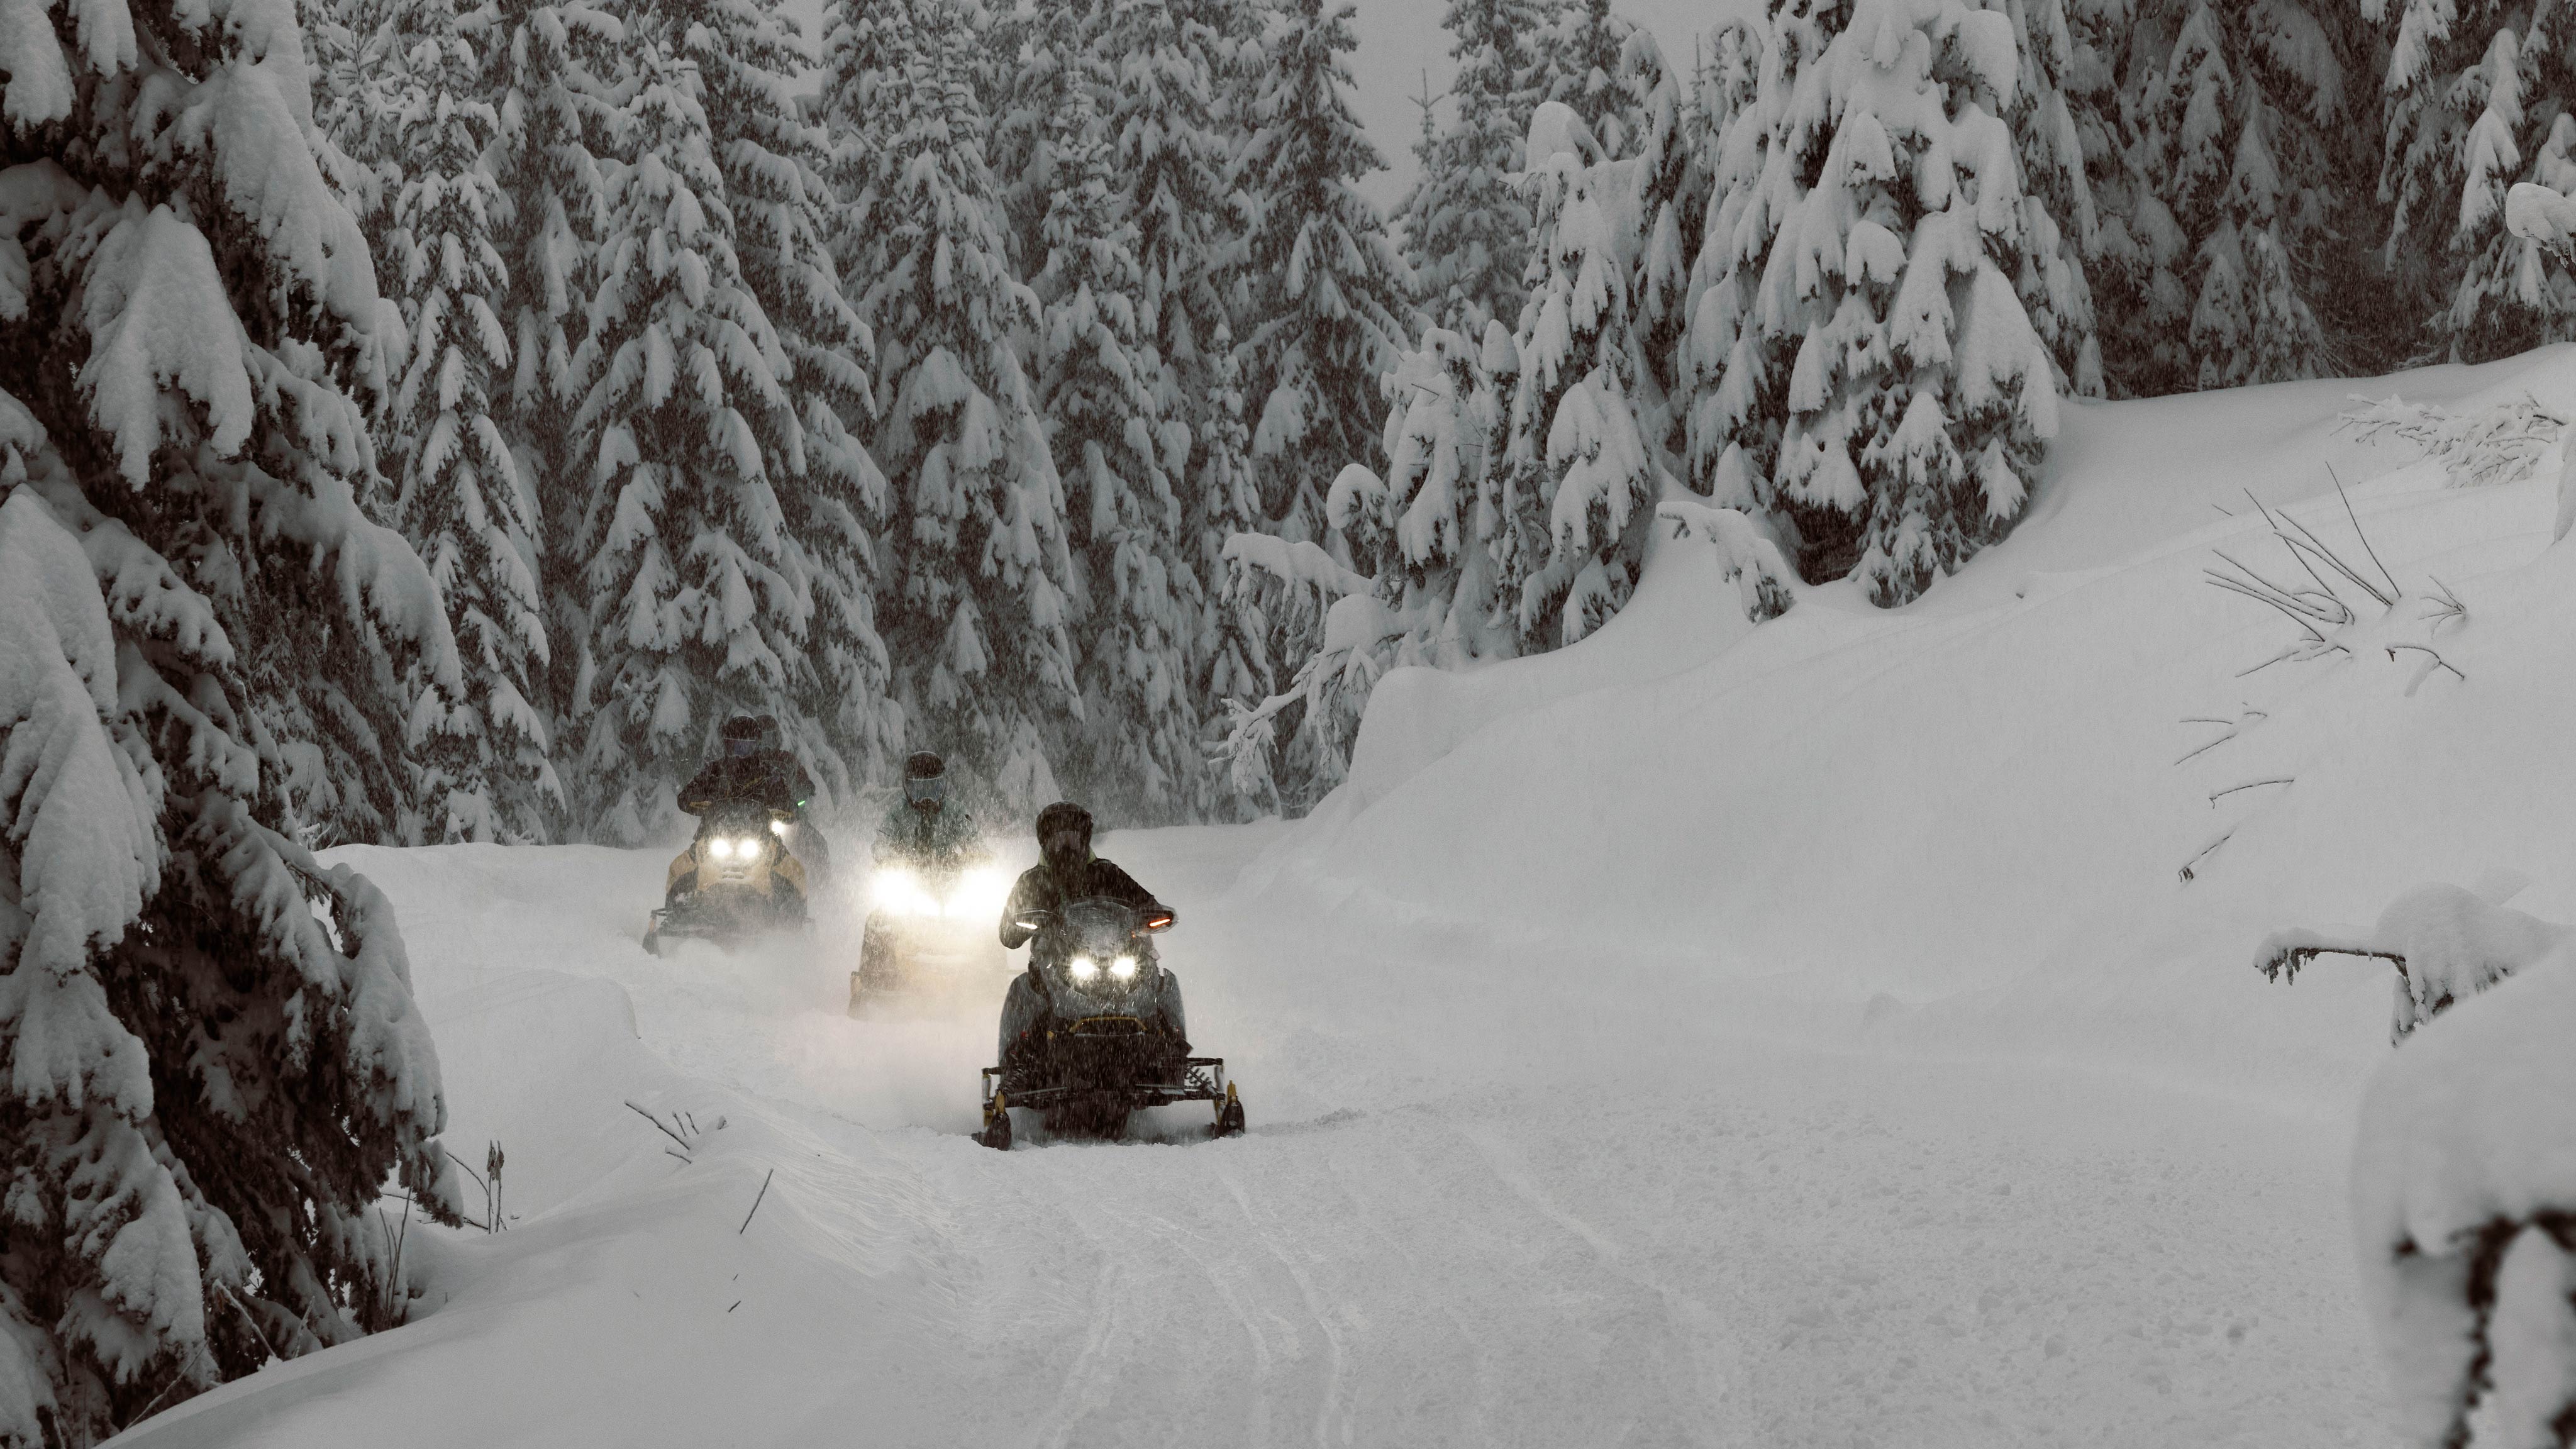 Three riders taking a break from a snowy ride on their Ski-Doo snowmobiles